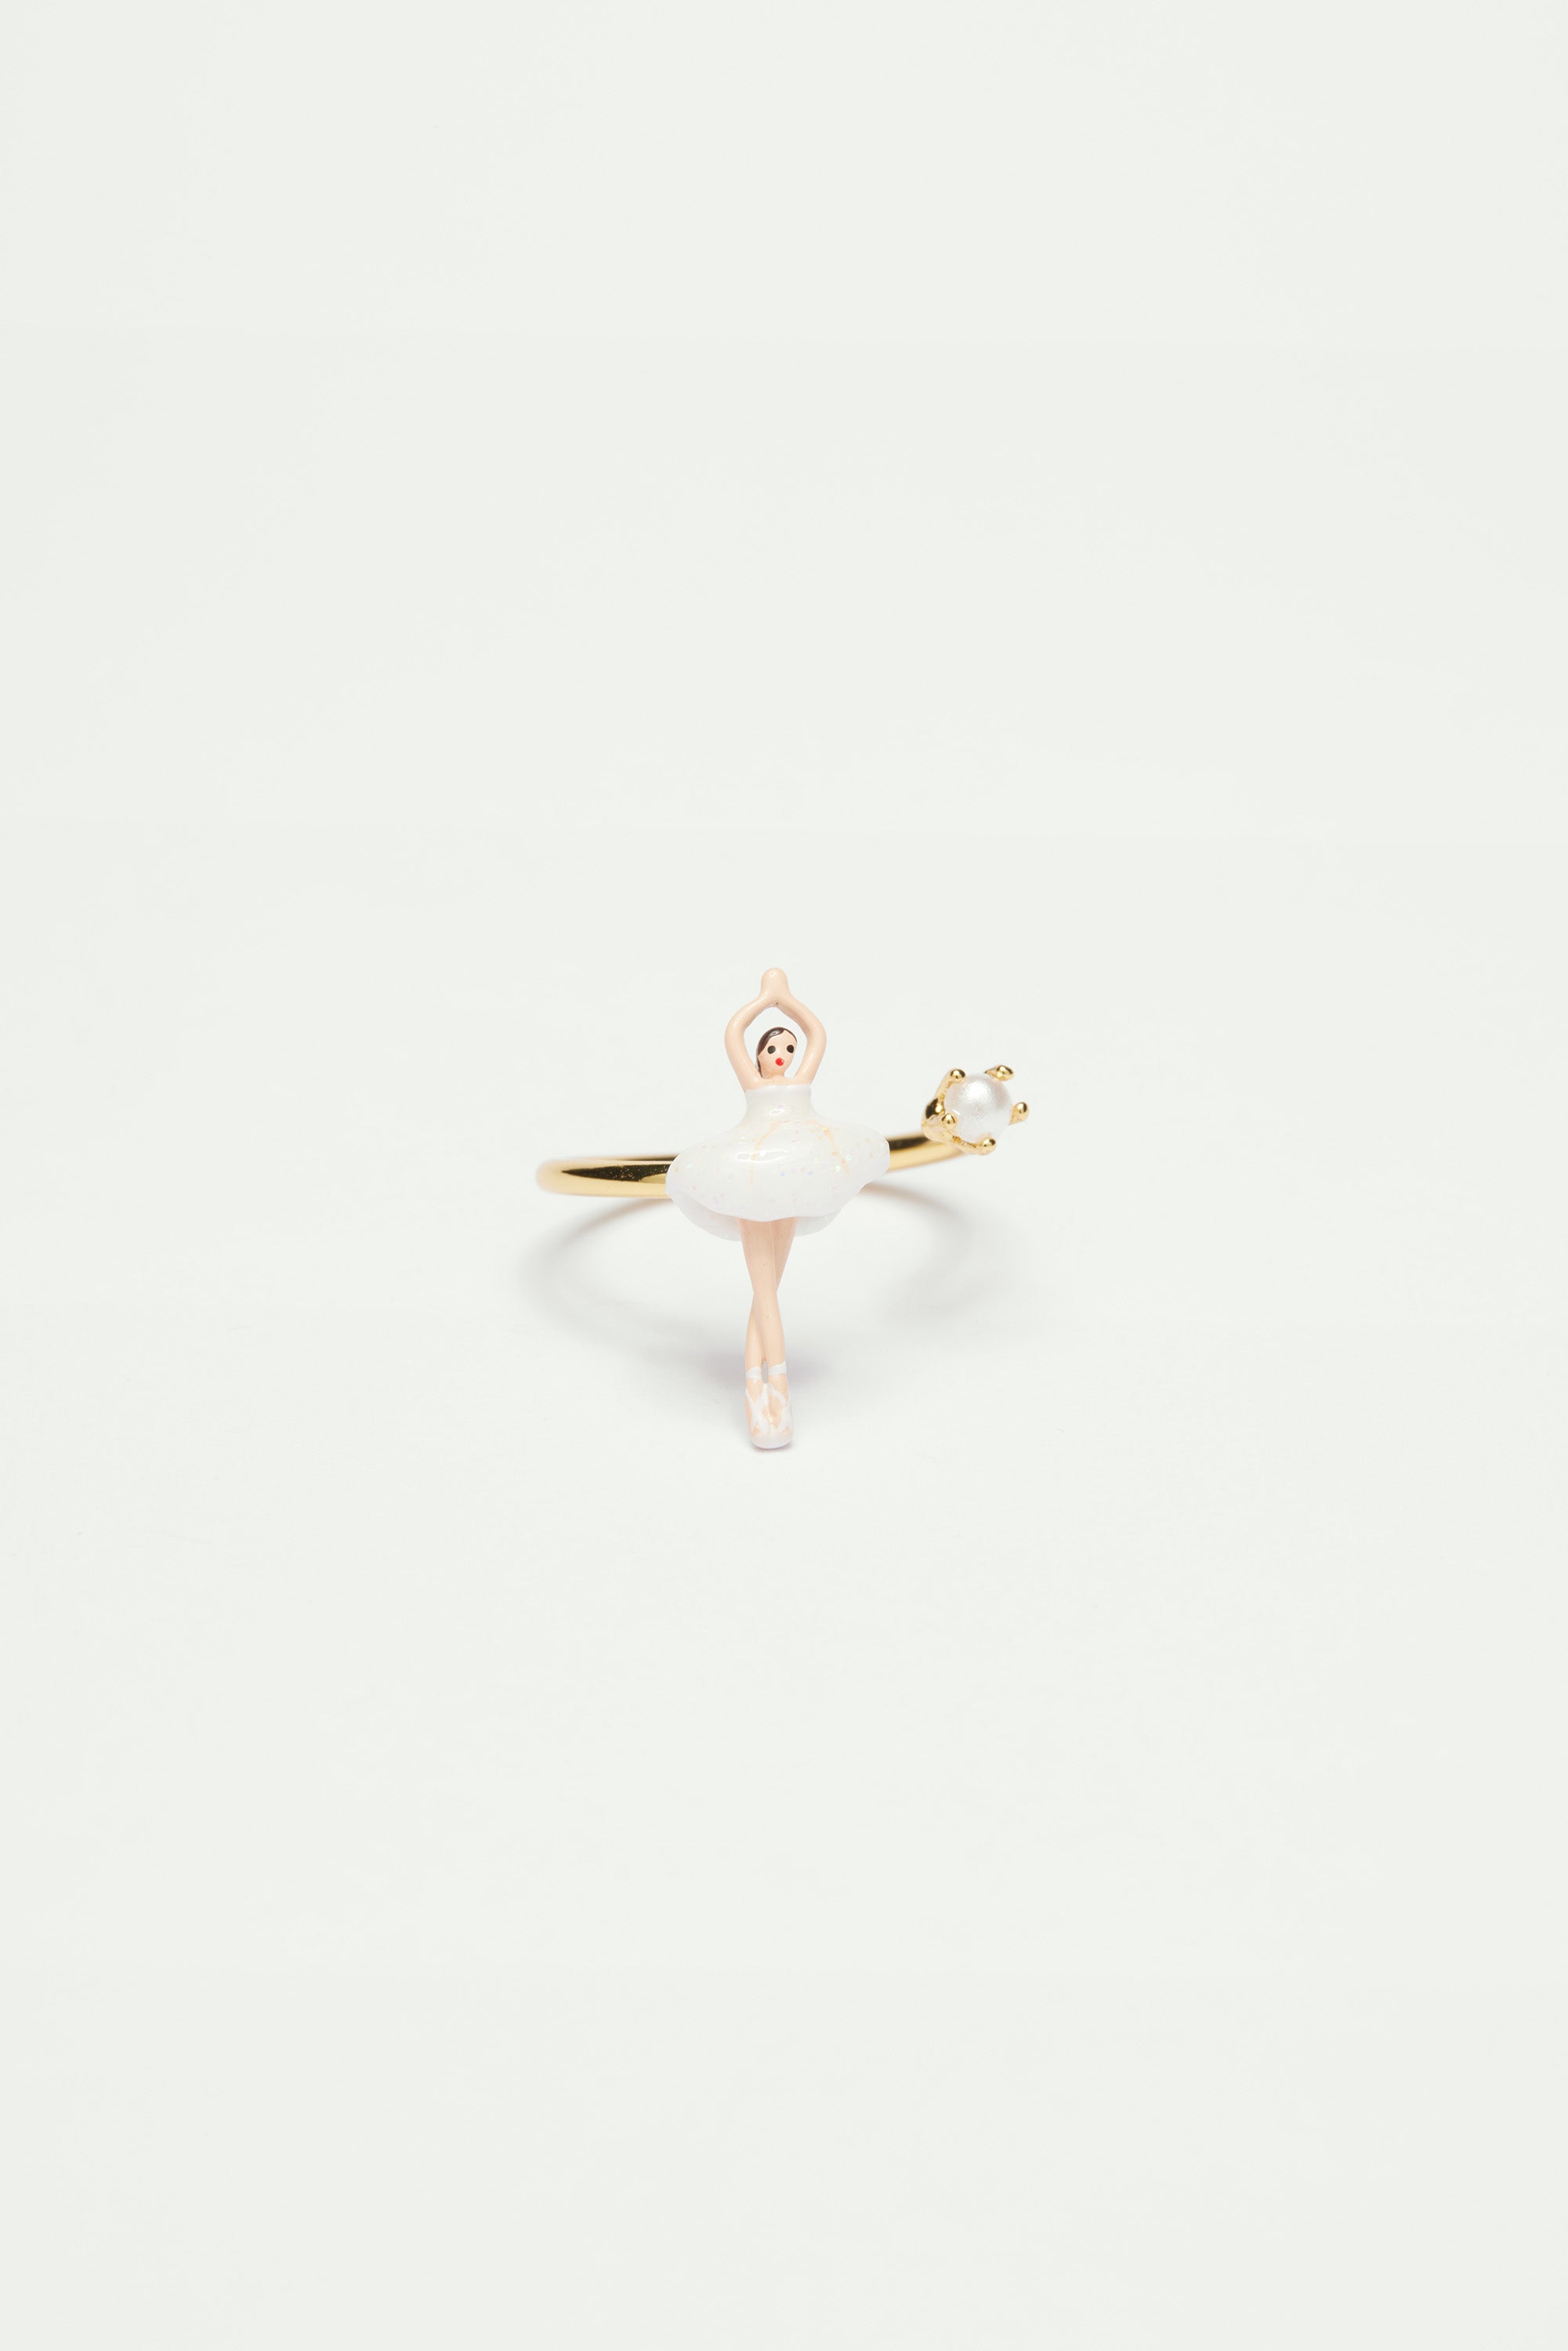 Adjustable ring with mini ballerina in a white tutu